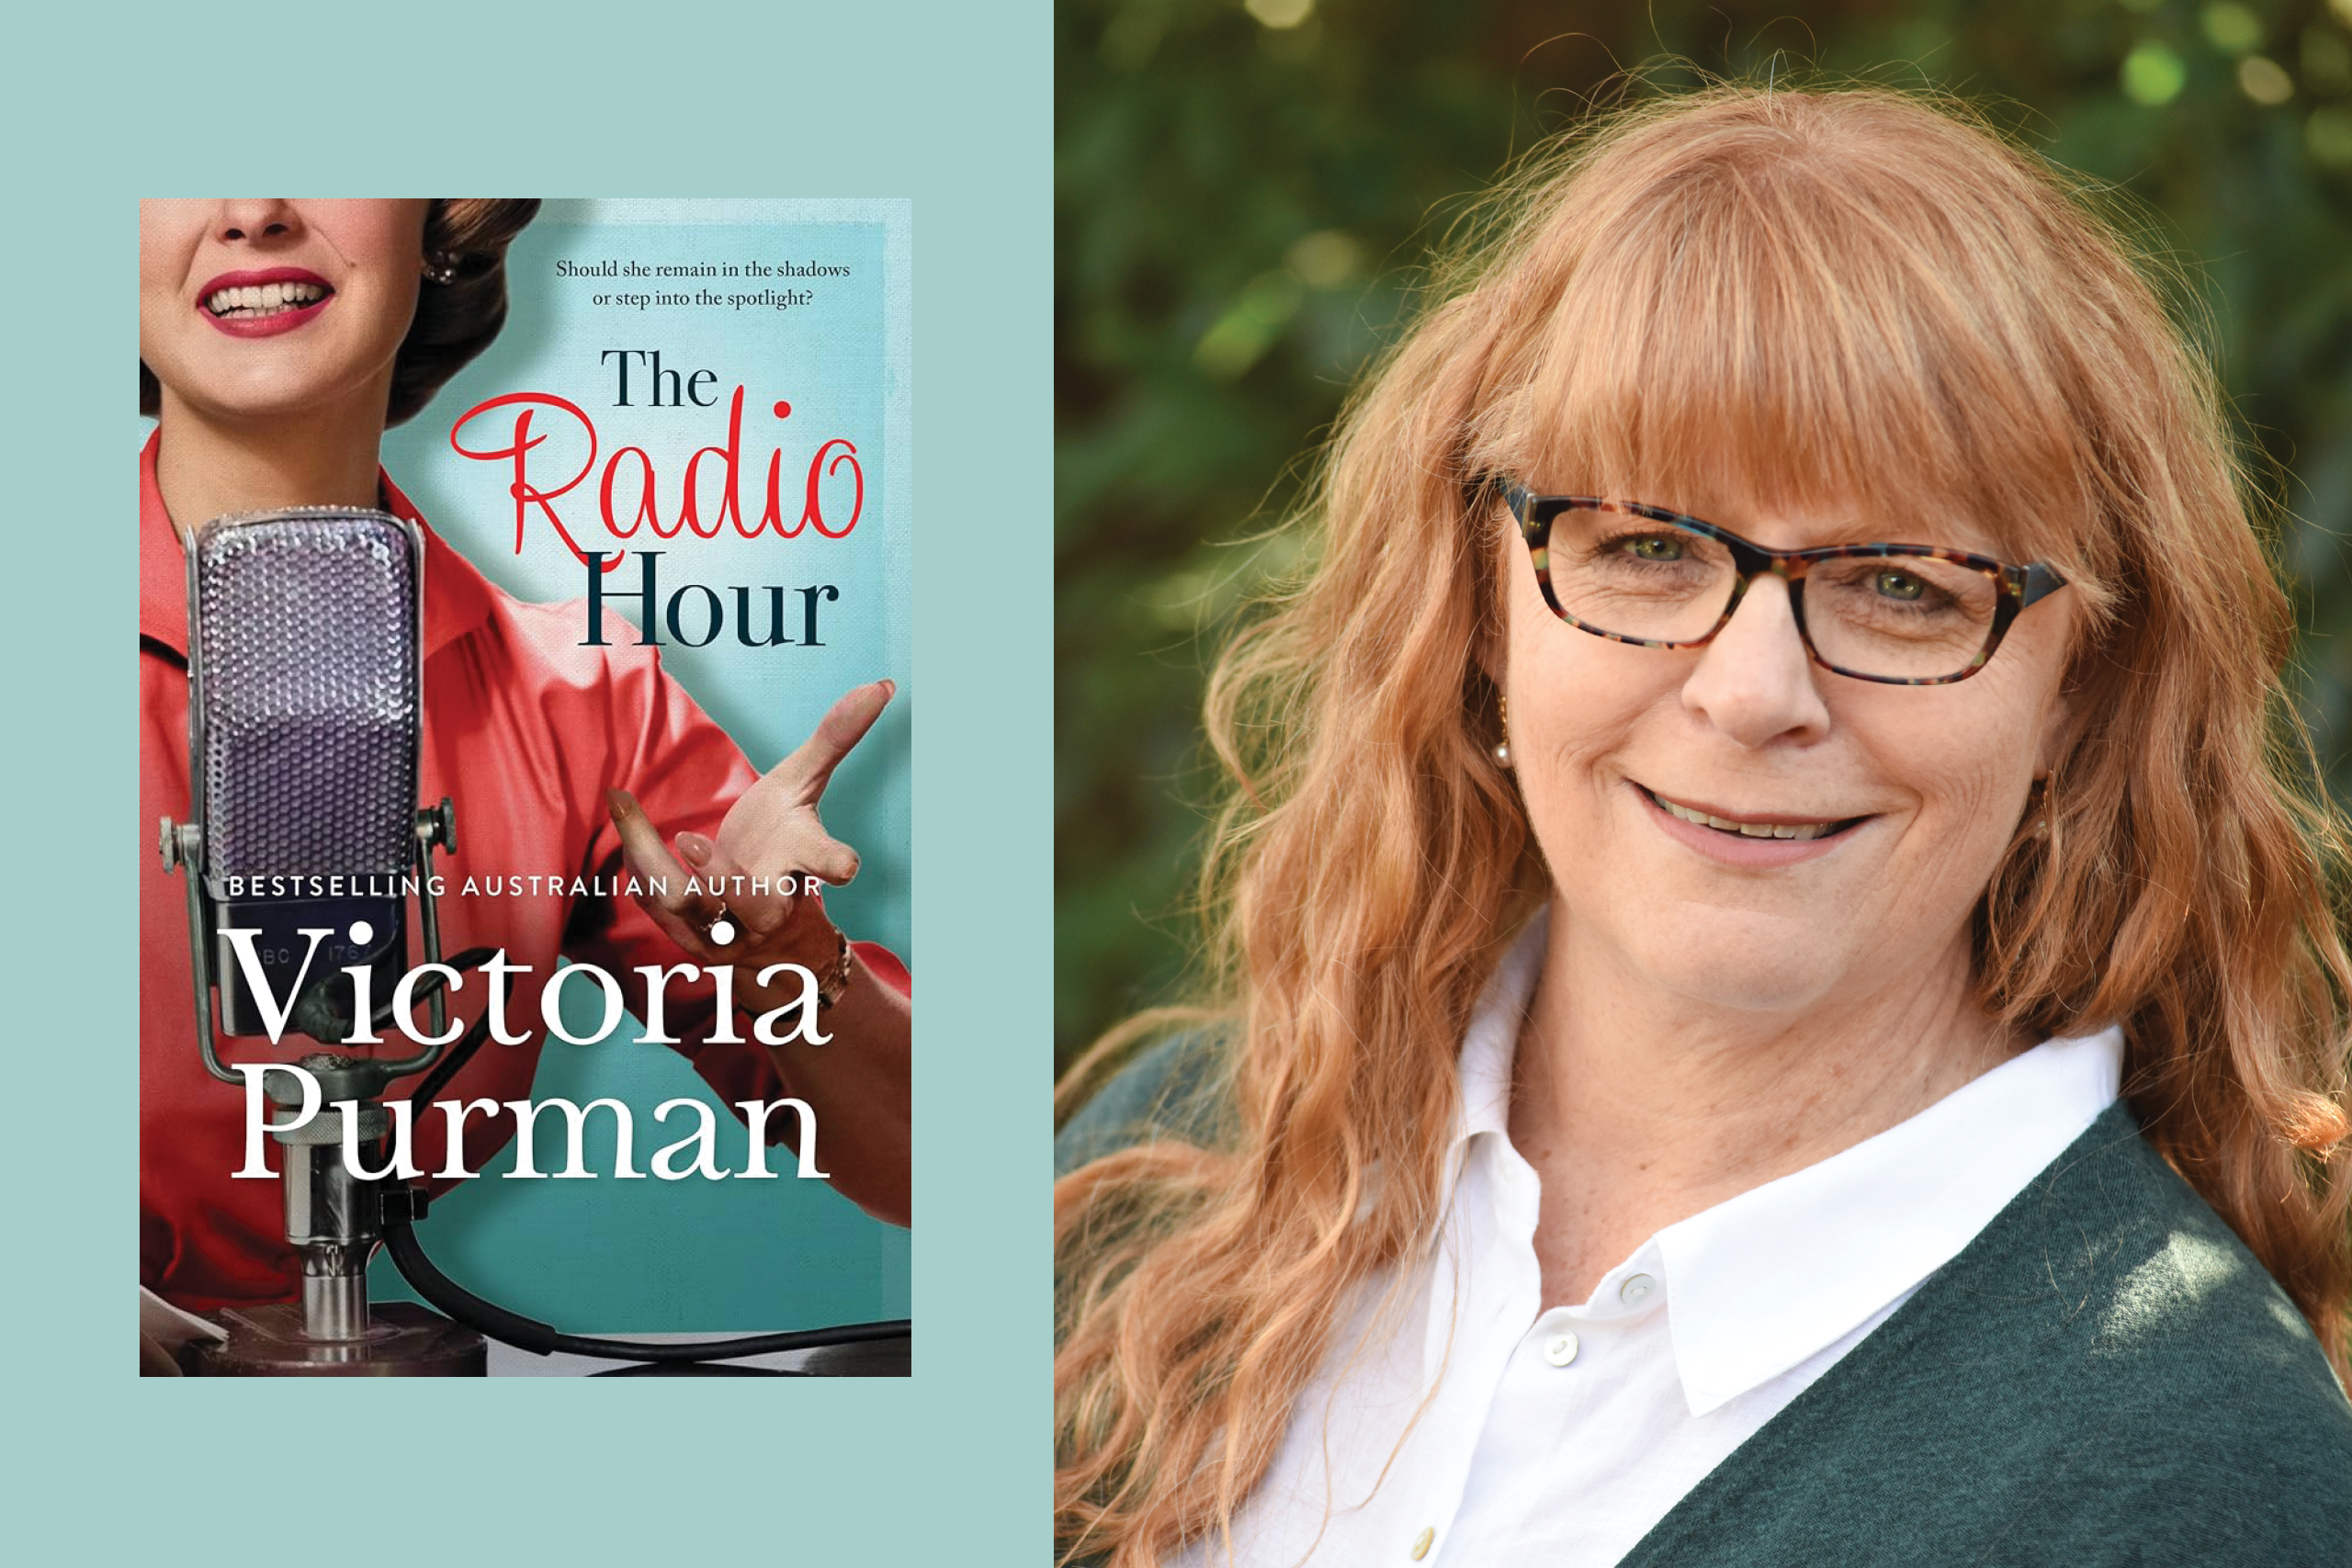 Author talk with Victoria Purman